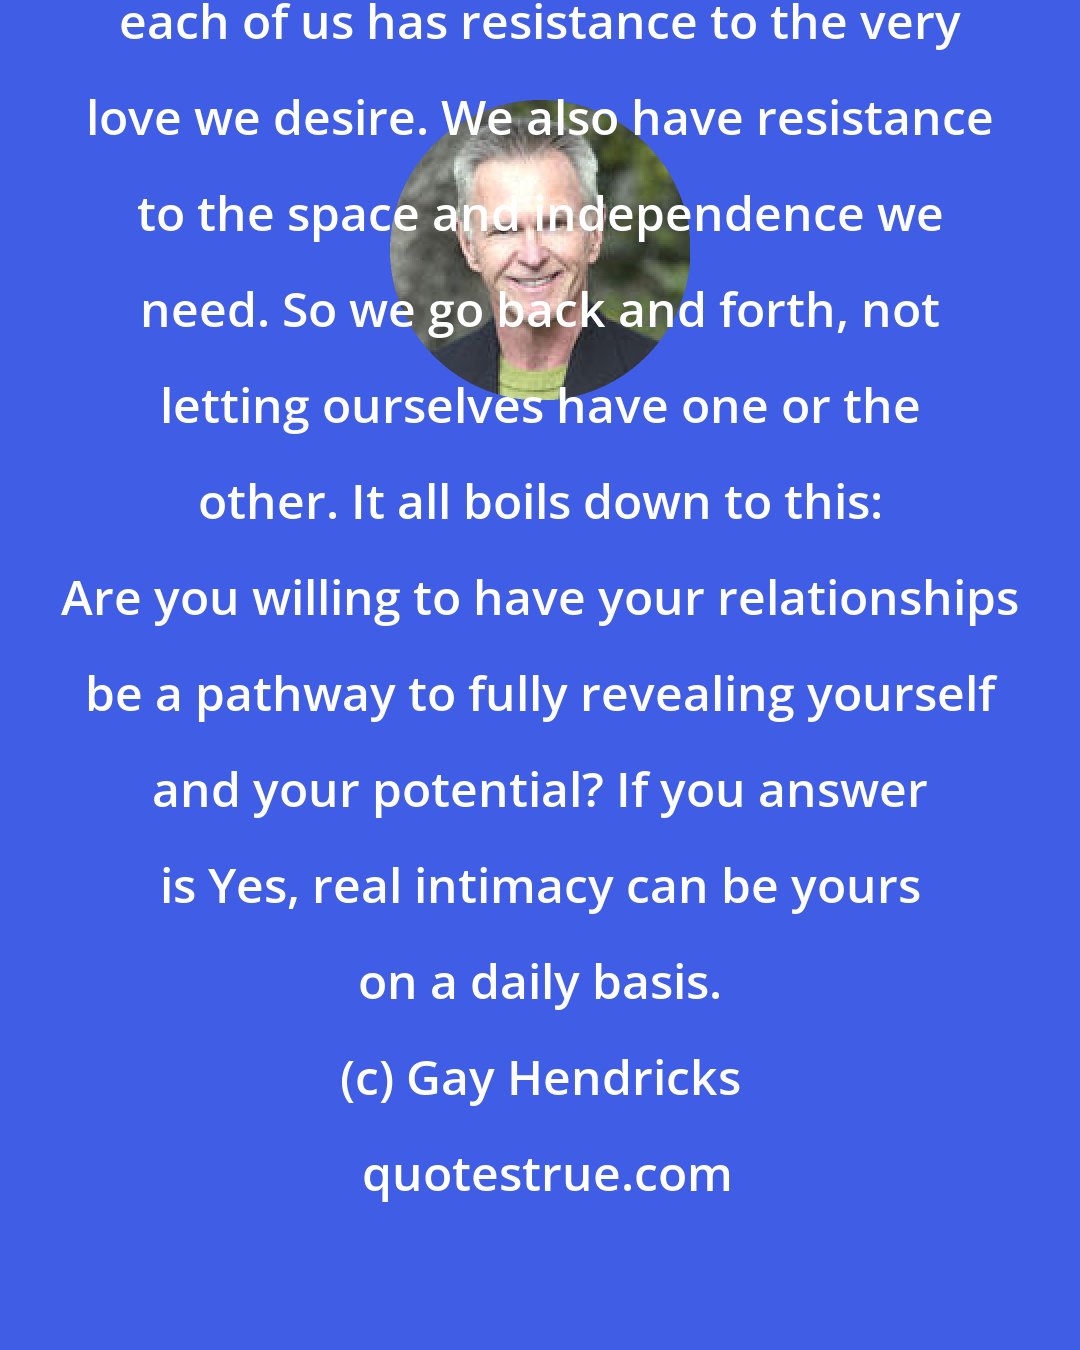 Gay Hendricks: It is not love that is to blame. But each of us has resistance to the very love we desire. We also have resistance to the space and independence we need. So we go back and forth, not letting ourselves have one or the other. It all boils down to this: Are you willing to have your relationships be a pathway to fully revealing yourself and your potential? If you answer is Yes, real intimacy can be yours on a daily basis.